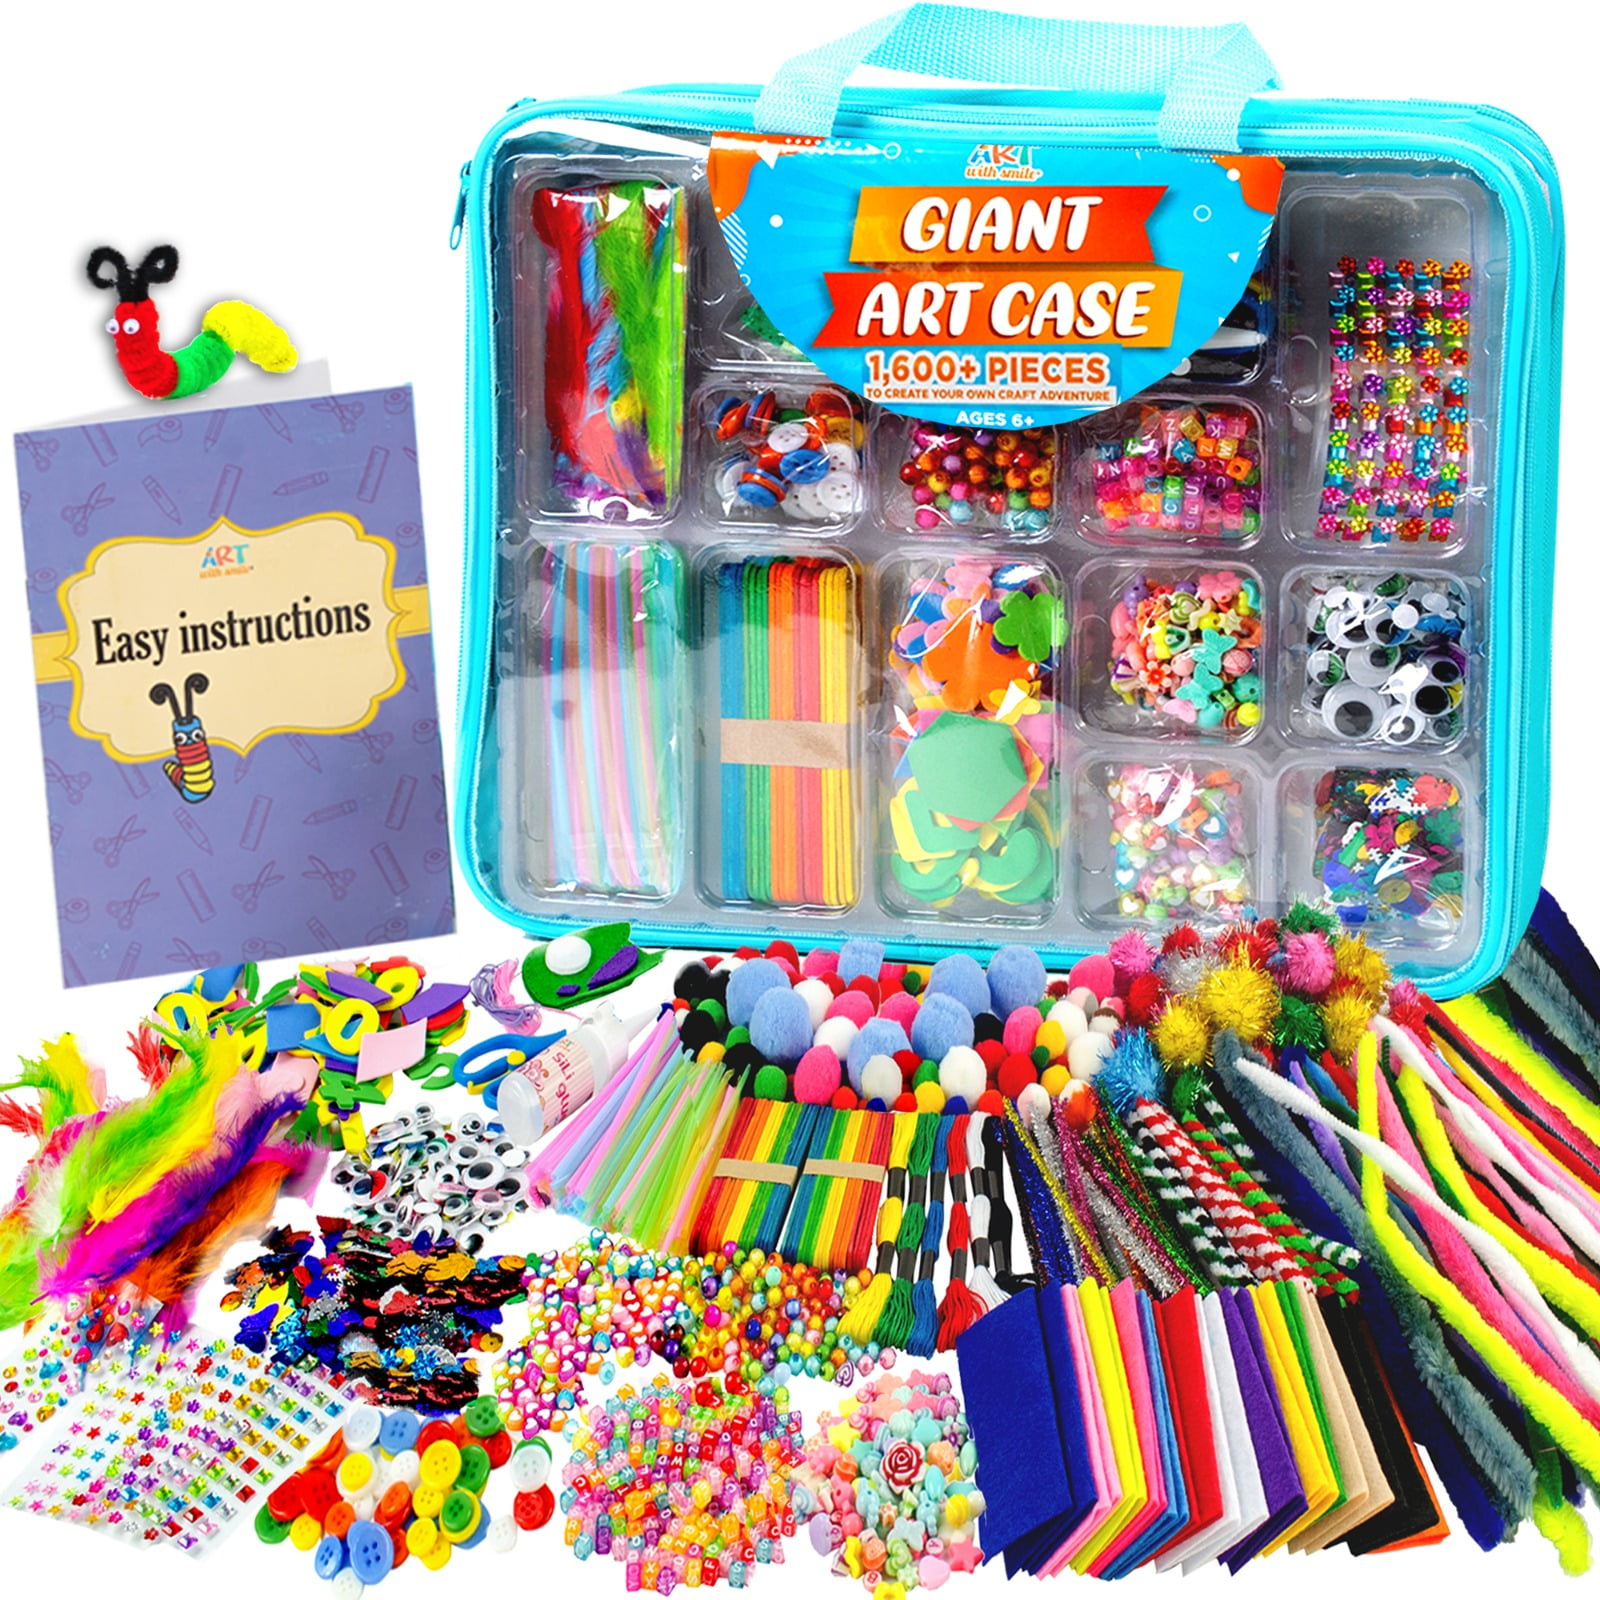 Arts and Crafts for Kids Ages 8-12, Rainbow Craft Kit, Arts and Crafts for  Kids Ages 6-8, Crafts for Girls Ages 8-12, Art Supplies for Kids 9-12, 7pcs